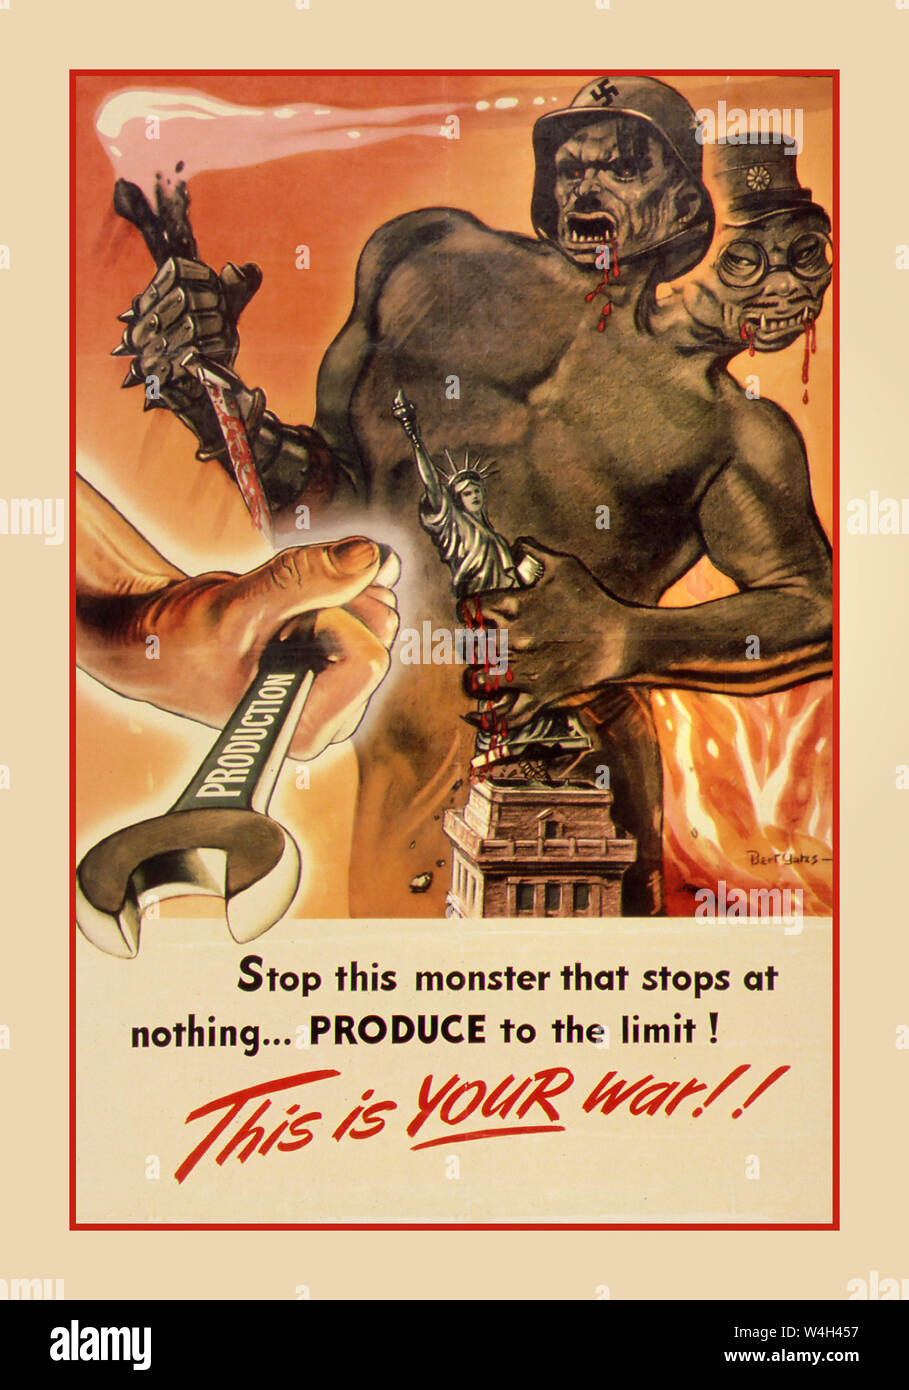 Vintage 1940's Propaganda Poster WW2 USA American America “STOP THIS MONSTER THAT STOPS AT NOTHING”. “PRODUCE TO THE LIMIT. THIS IS YOUR WAR”. Nazi Germany Hitler and Hirohito Japanese Leaders illustrated as bloodthirsty fiends... 1941-1945 World War II Second World War American WW2 industrial output propaganda Stock Photo